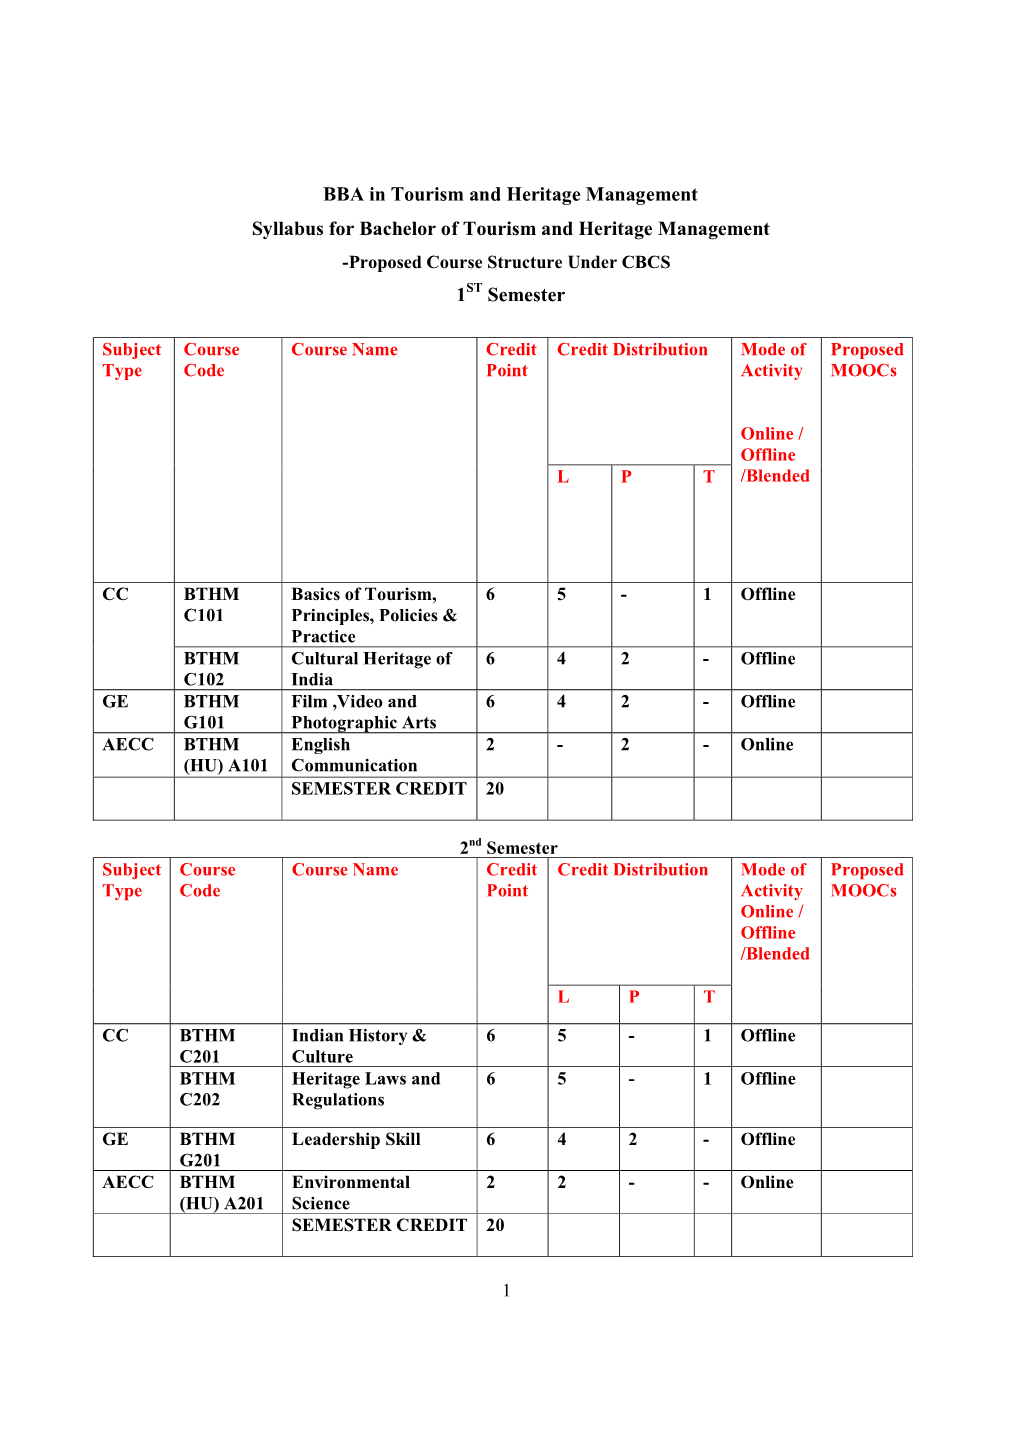 BBA in Tourism and Heritage Management Syllabus for Bachelor of Tourism and Heritage Management -Proposed Course Structure Under CBCS 1ST Semester